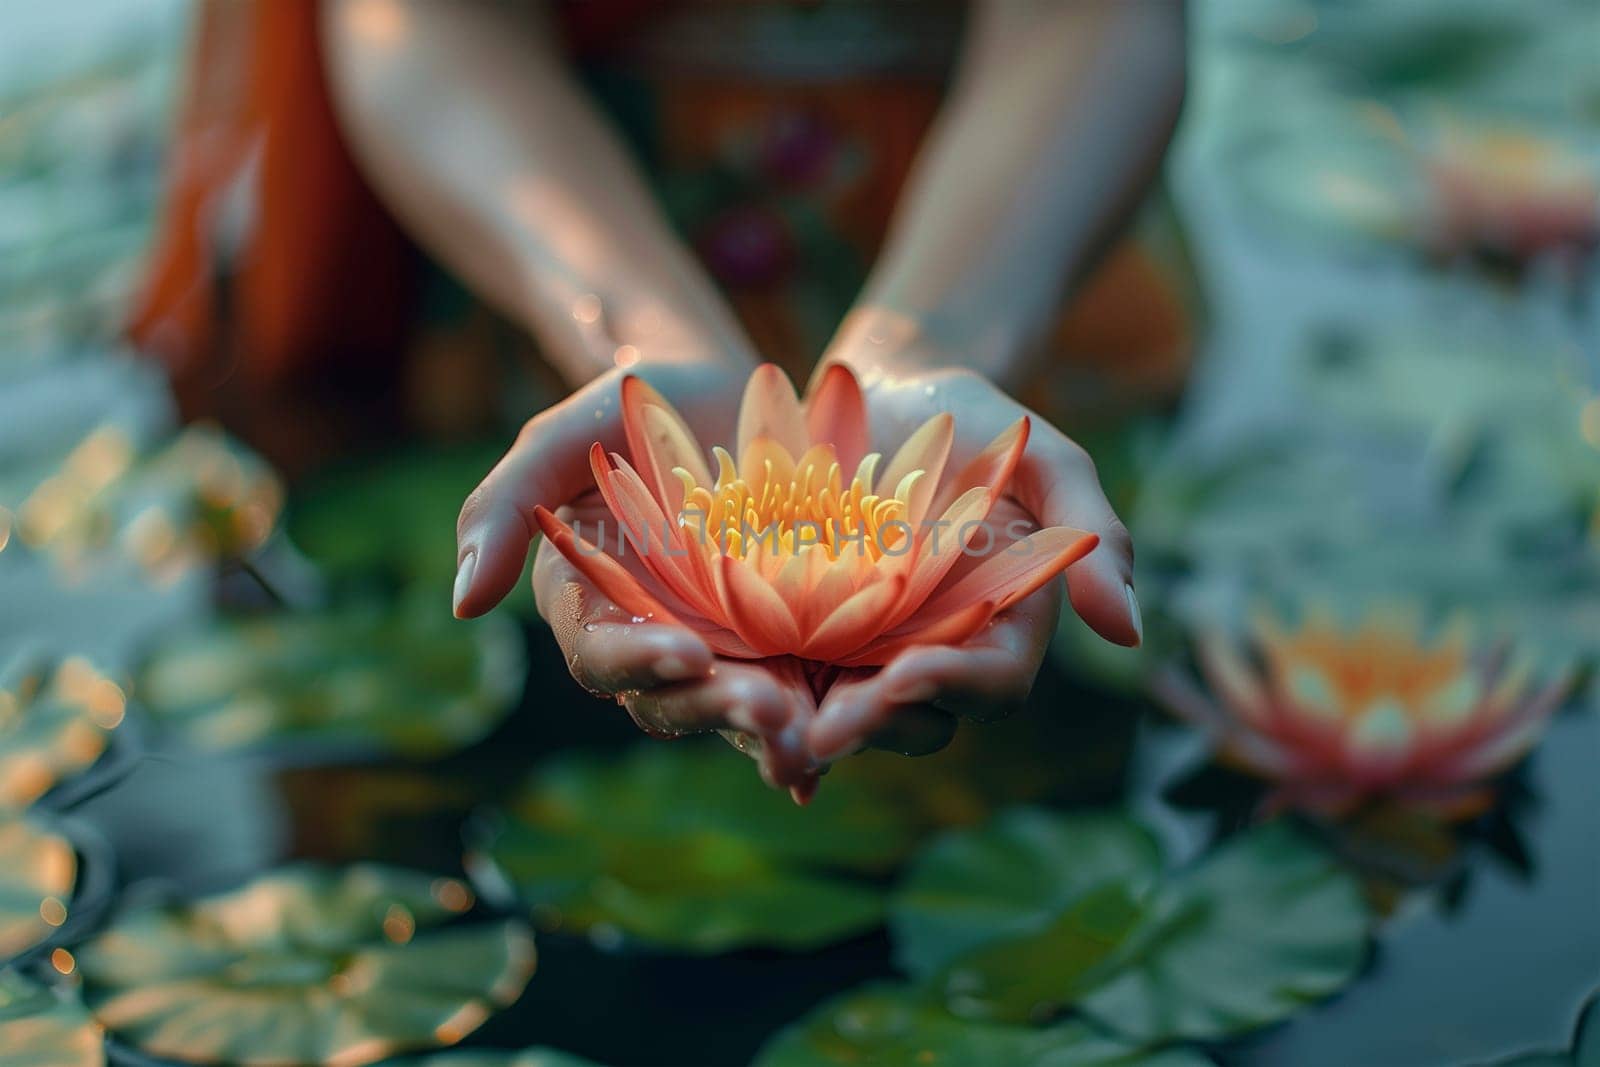 A person delicately holds a water lily flower in their hands, showcasing its vibrant colors and intricate details.